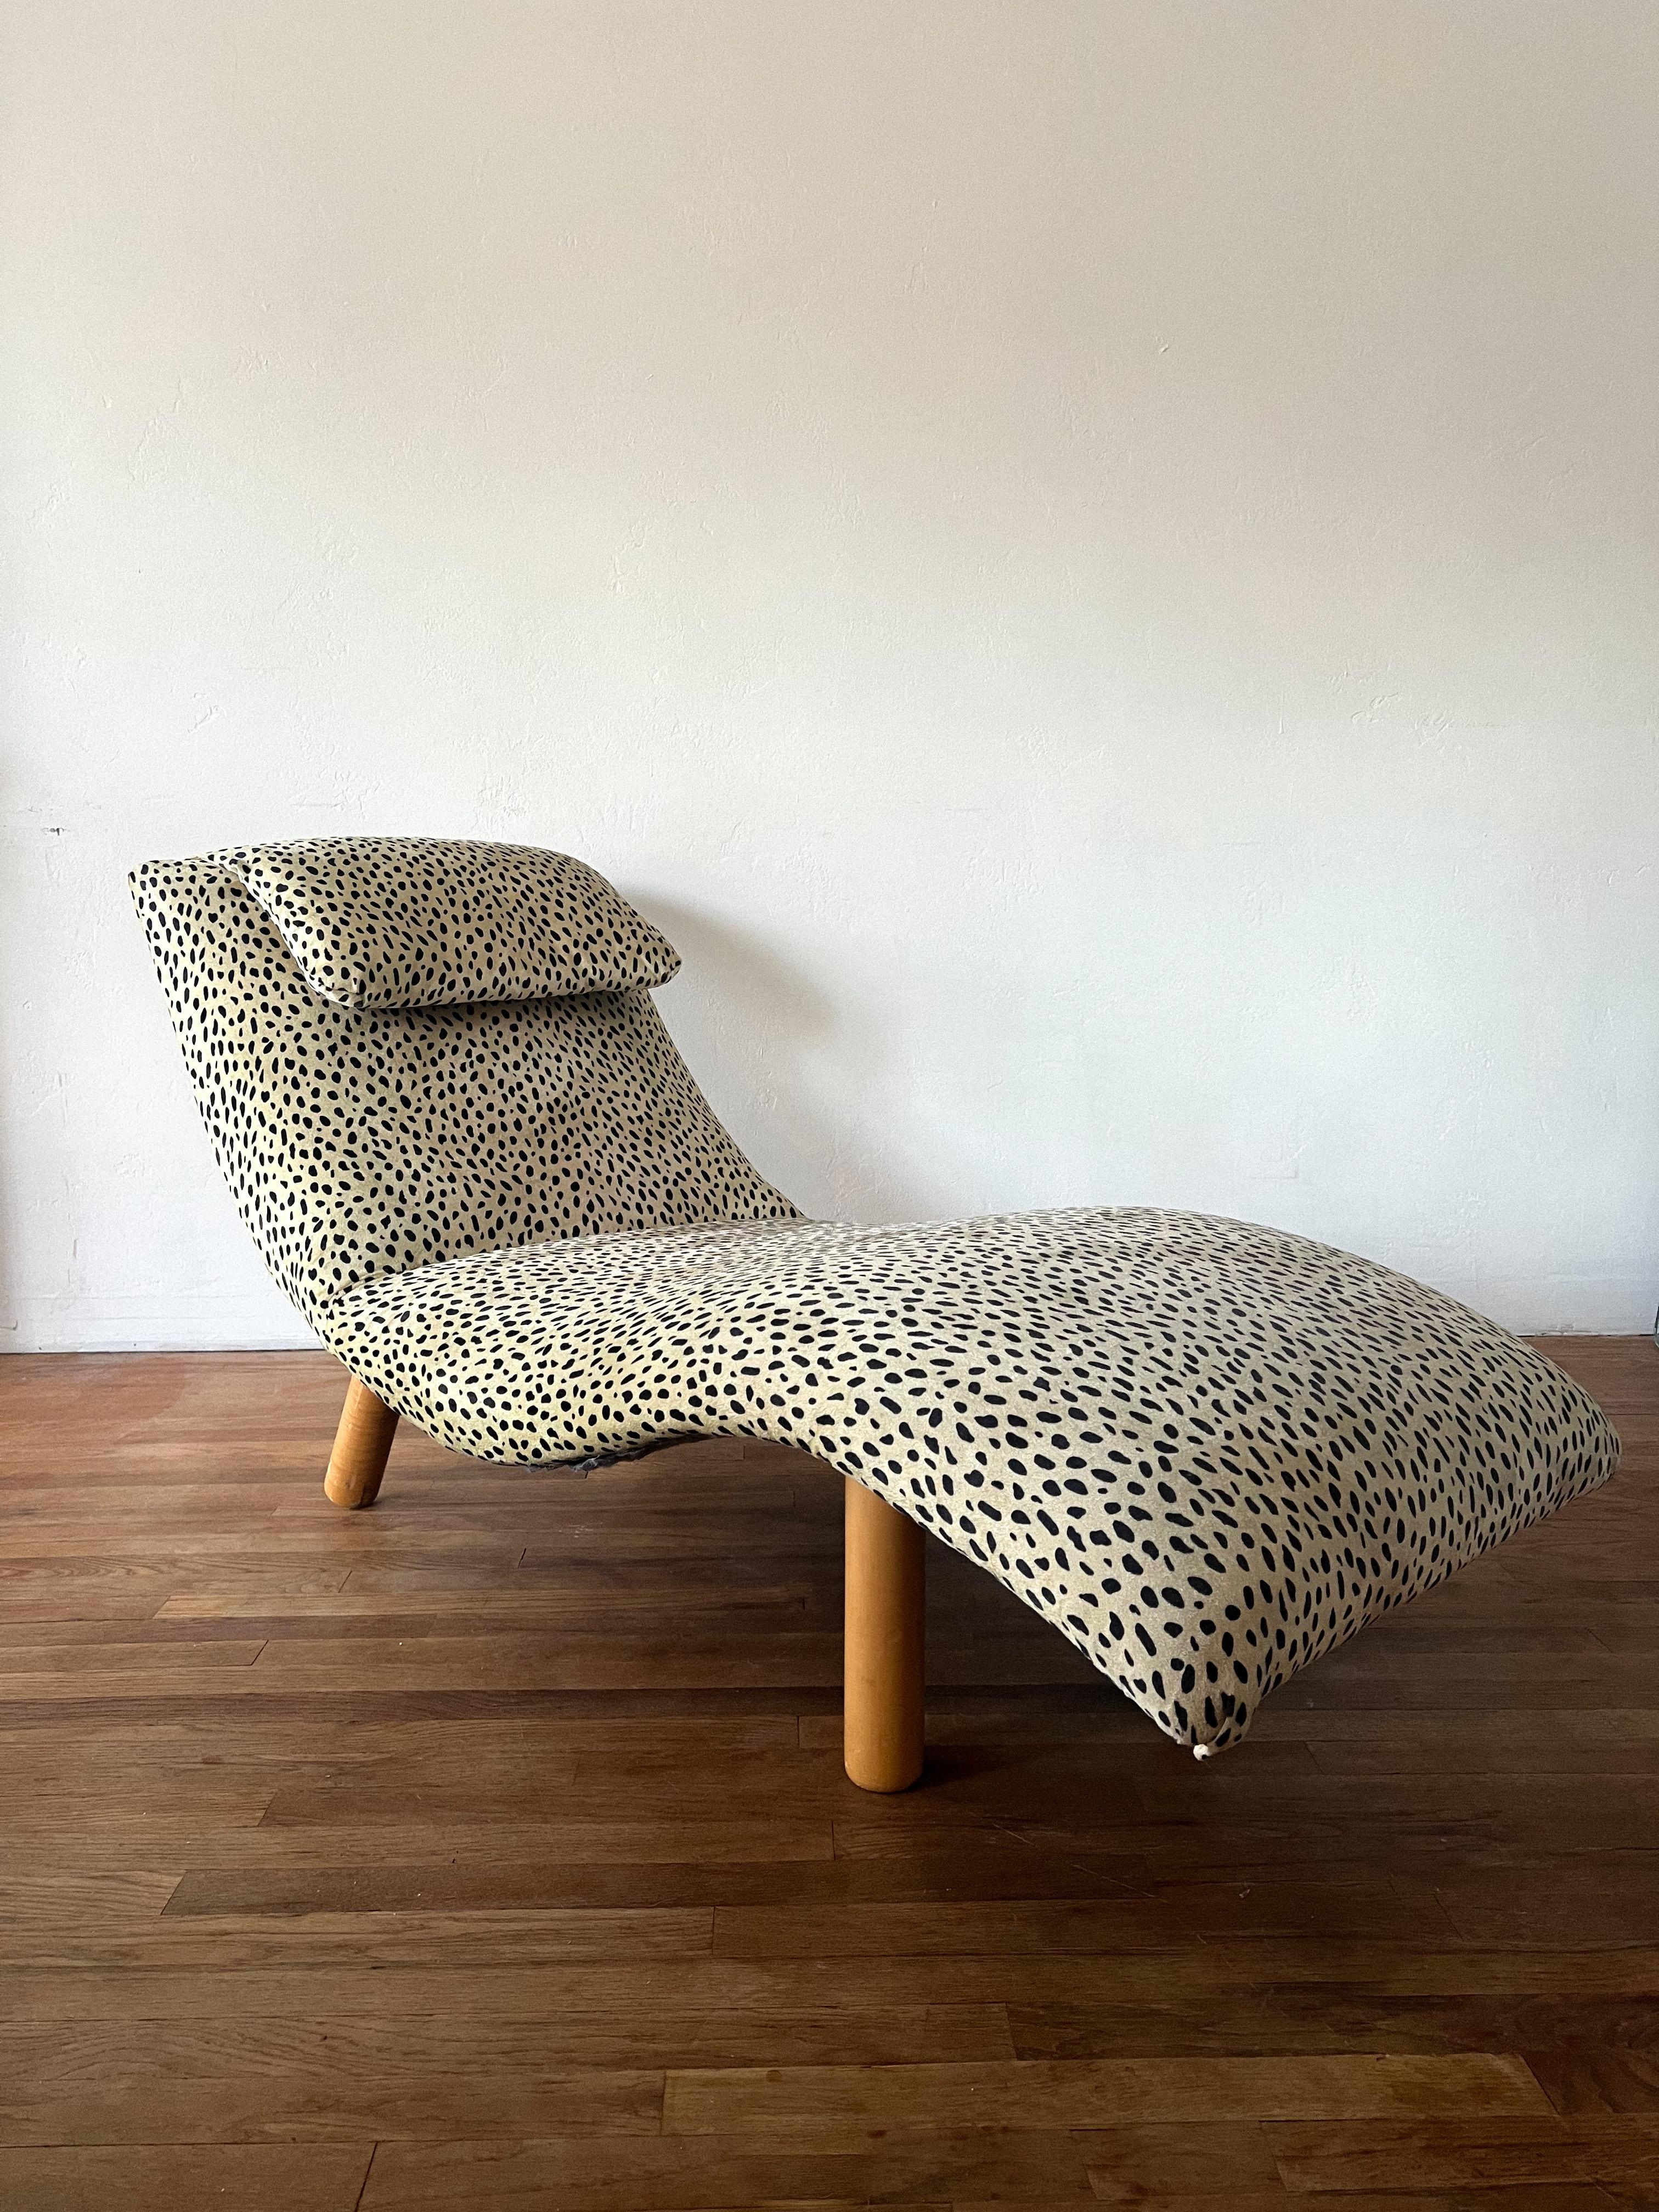 Sculptural chaise in the shape of a wave which has been attributed to designer Enrico Bartolini. Upholstered in a leopard print velvet. This is an amazing statement piece that is extremely comfortable.